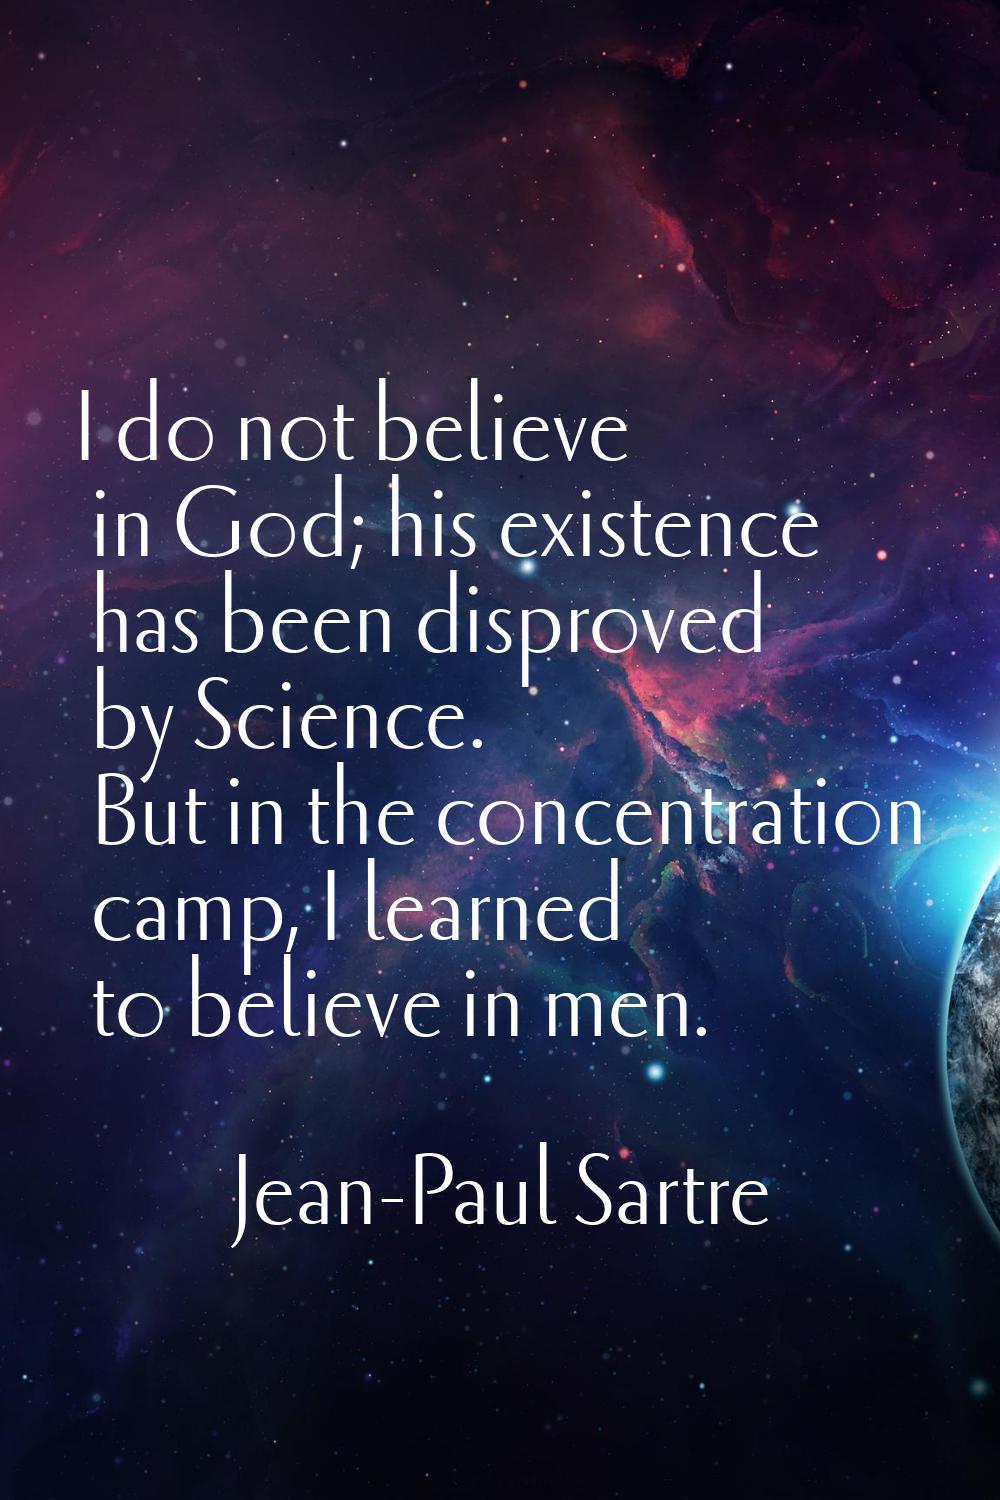 I do not believe in God; his existence has been disproved by Science. But in the concentration camp